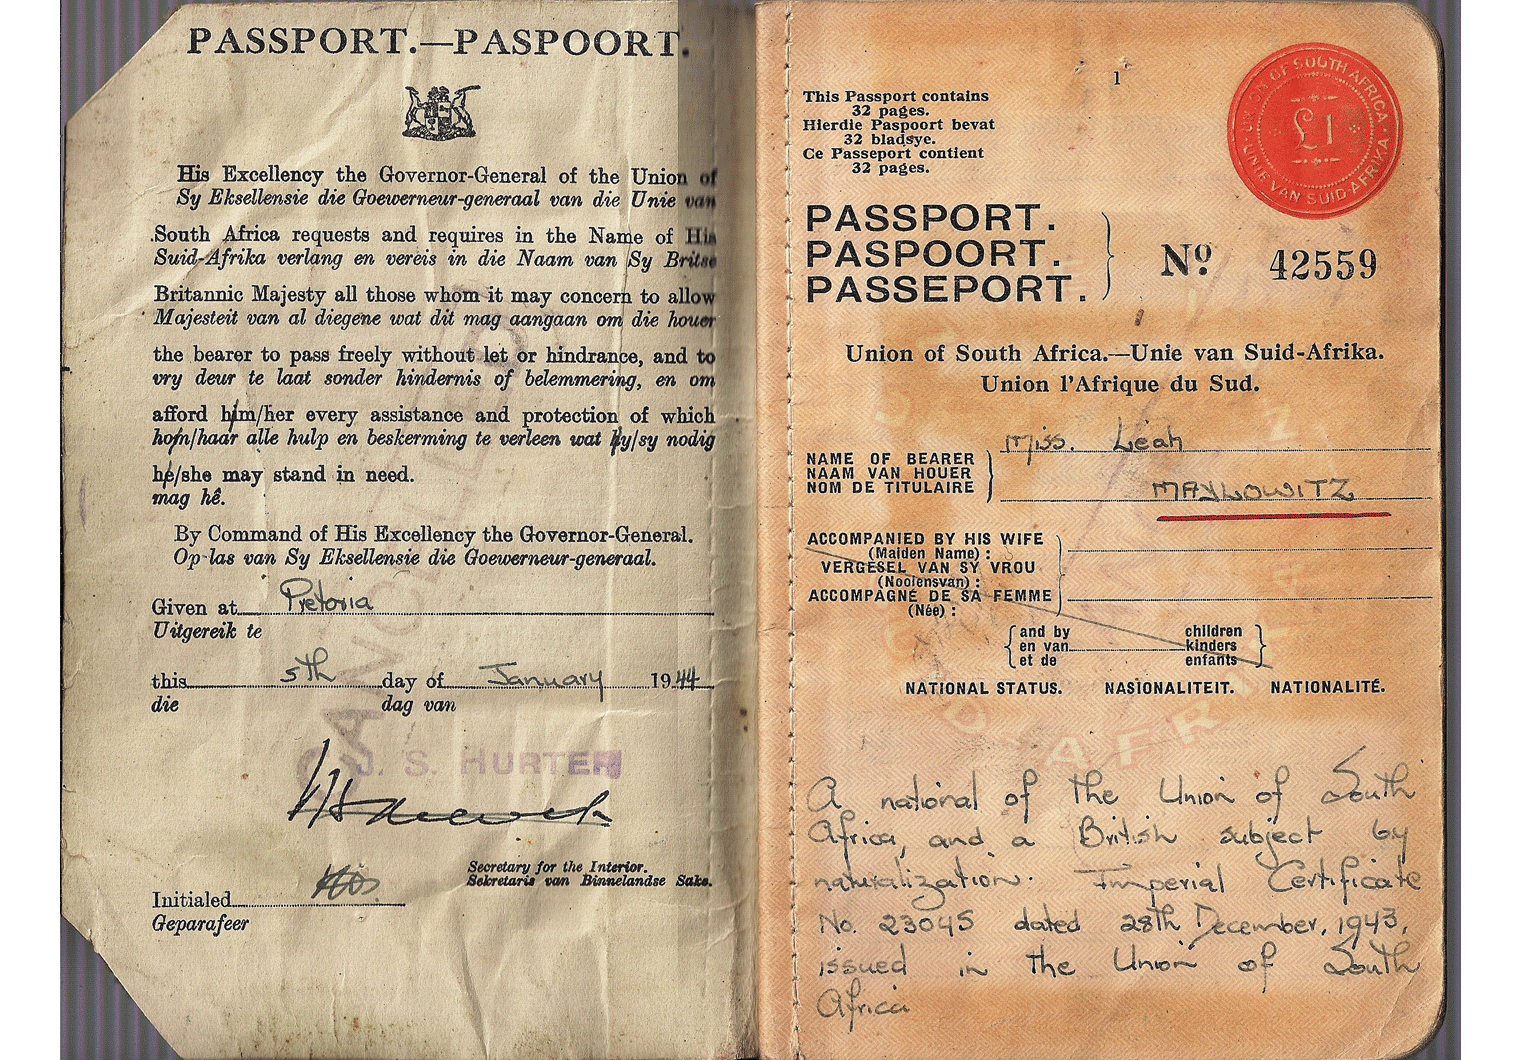 1944 issued South African passport